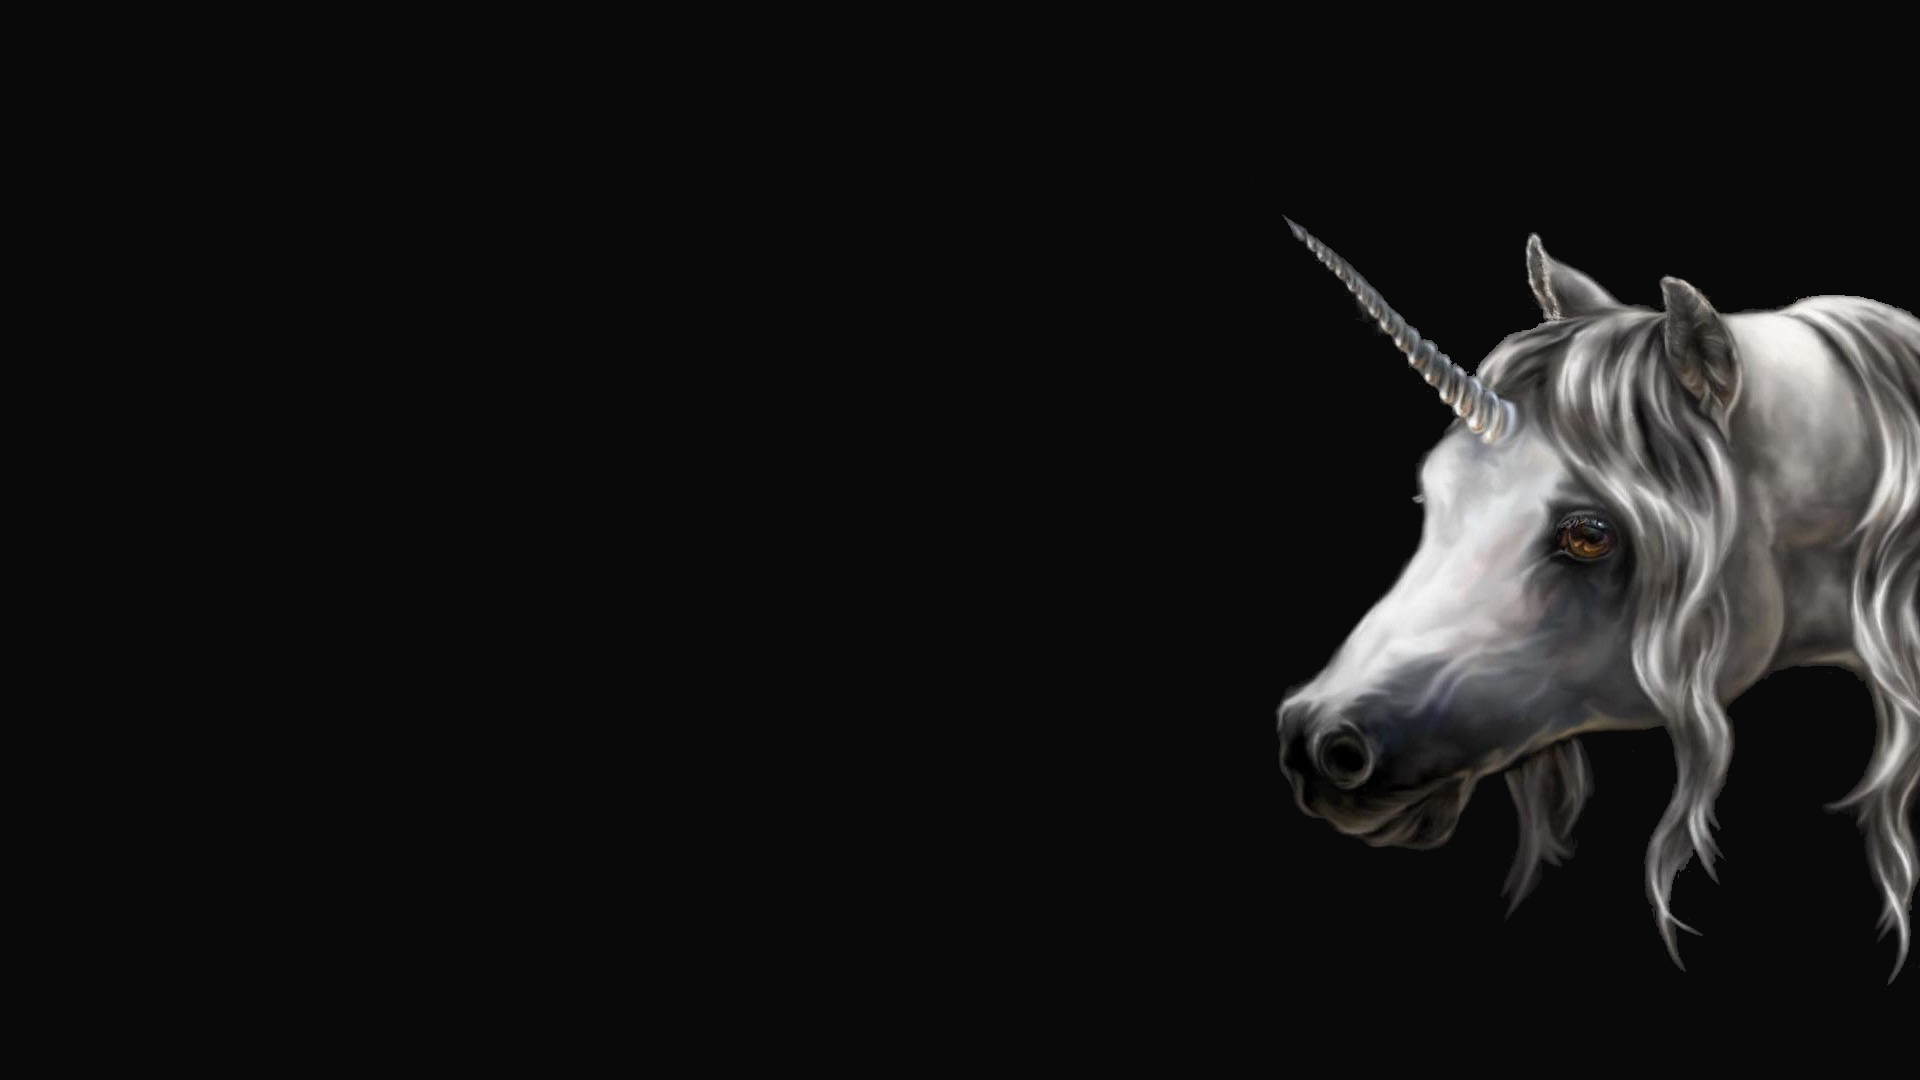  Unicorn  Backgrounds  Pictures Images